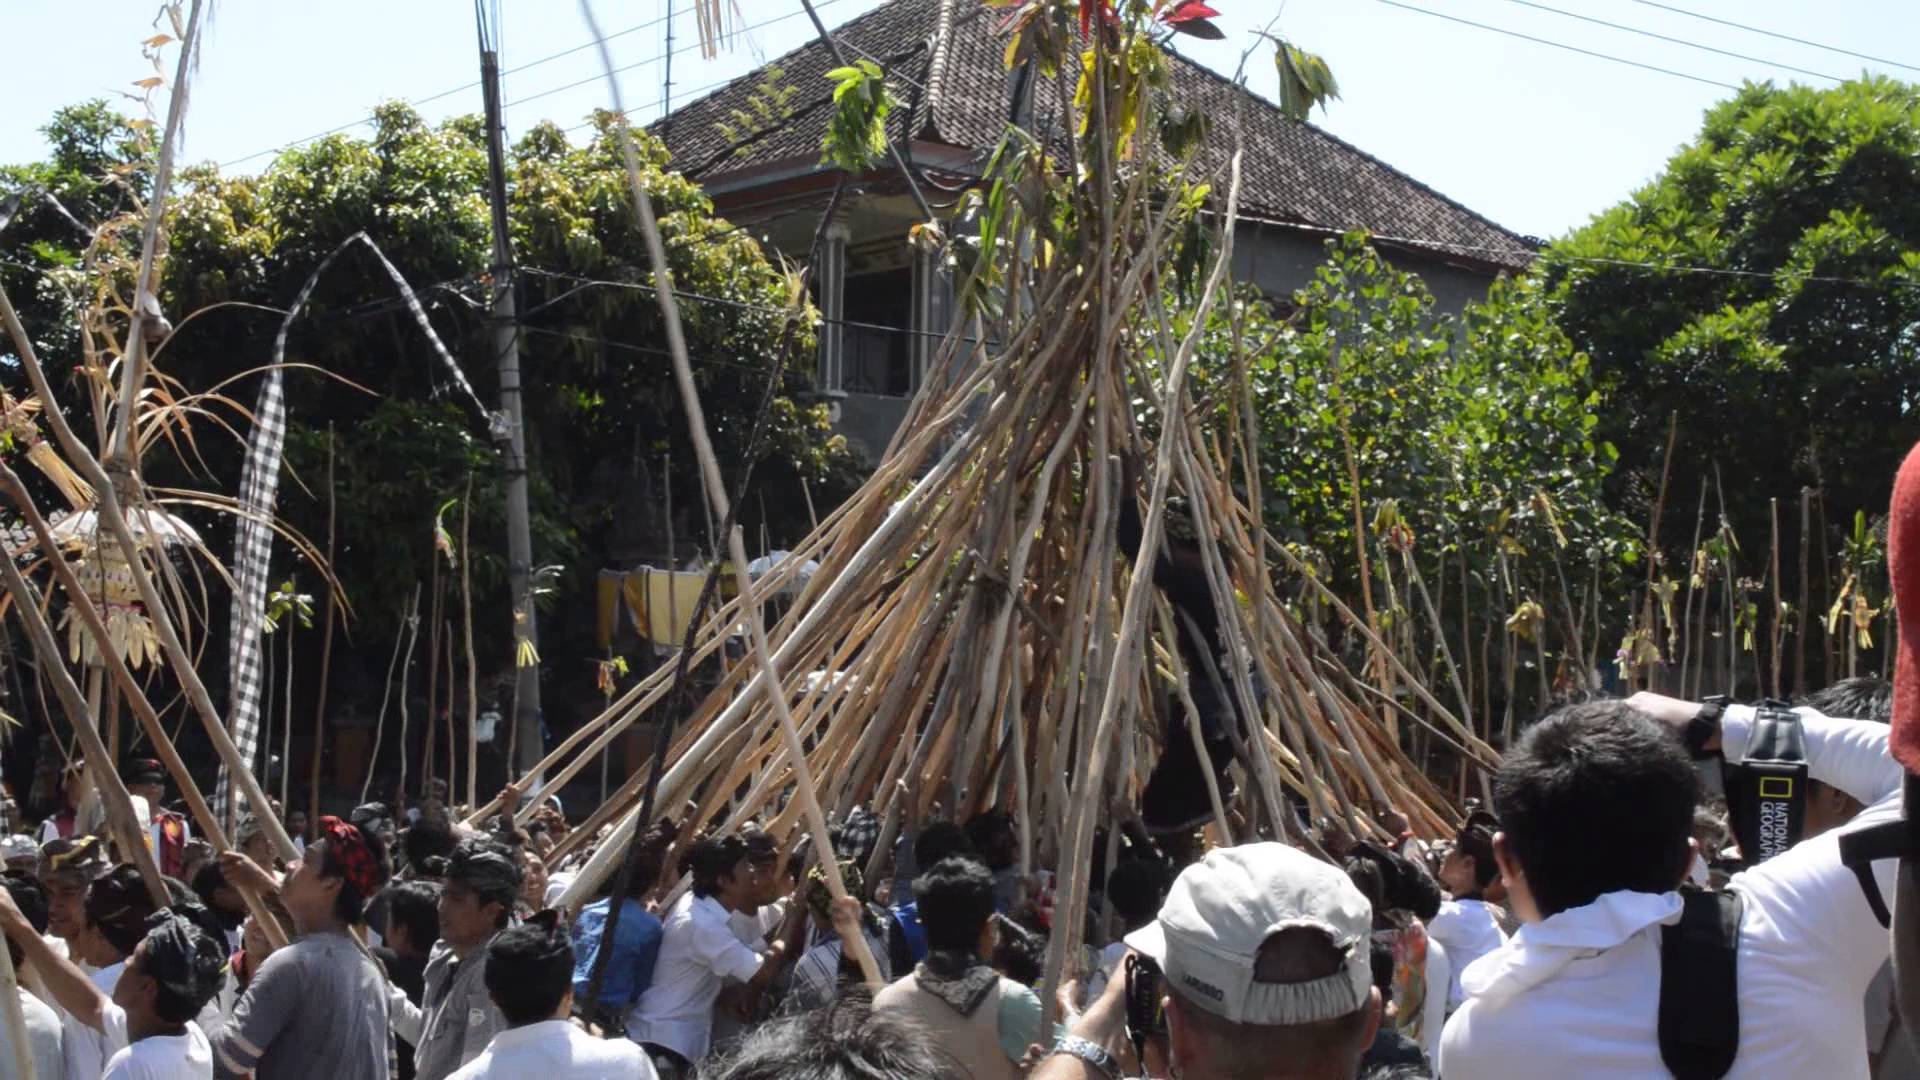 Another one of the several sacred ceremonies
held around the Kuningan holiday is Makotekan. It takes